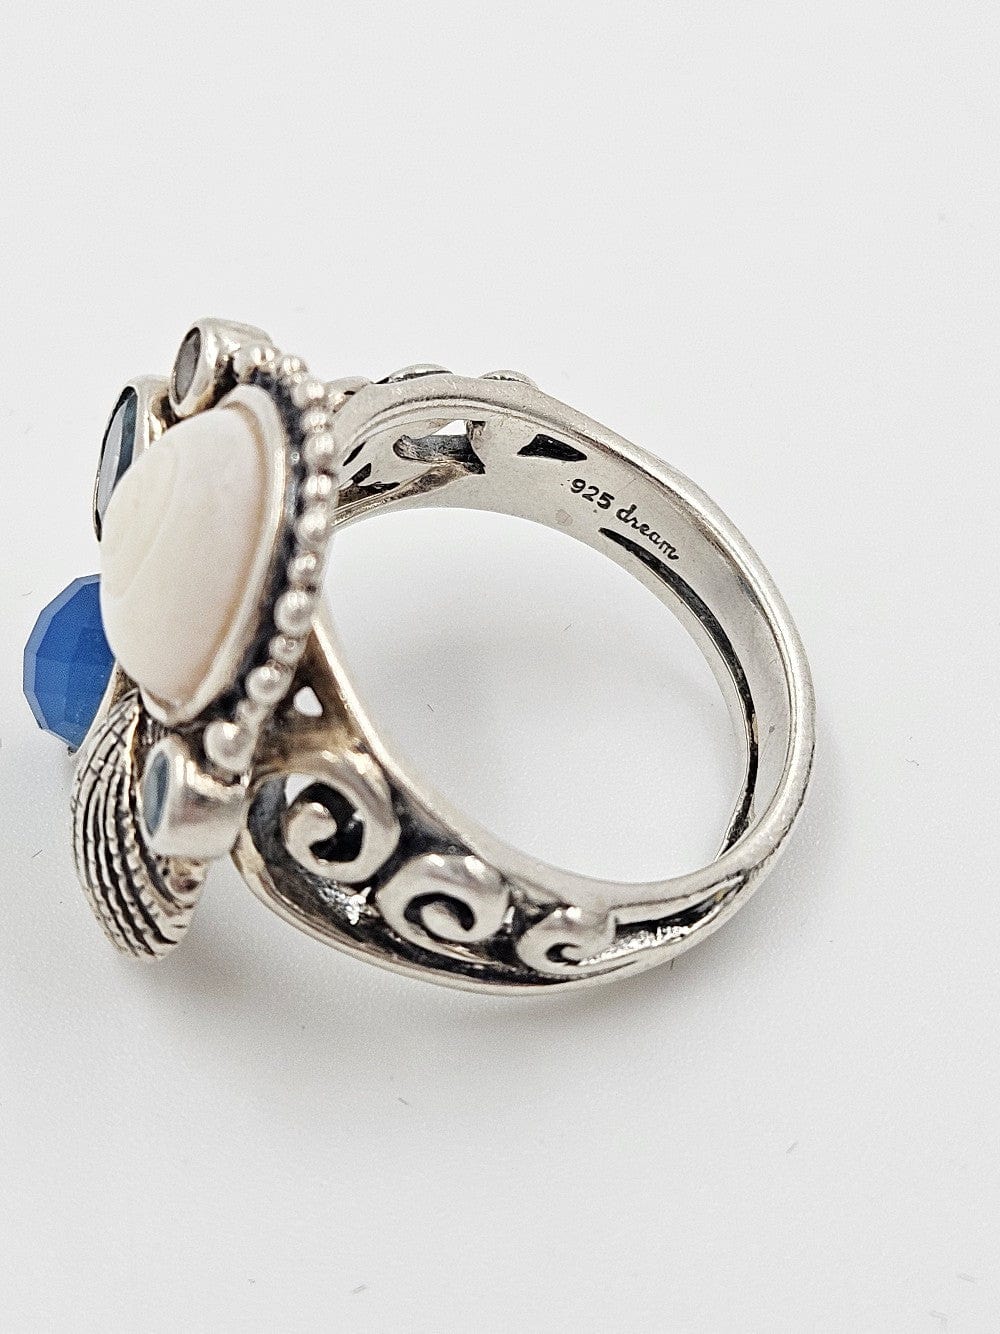 Echo of the Dreamer Jewelry OOAK Echo of the Dreamer Sterling Sea Themed Ring 1990's